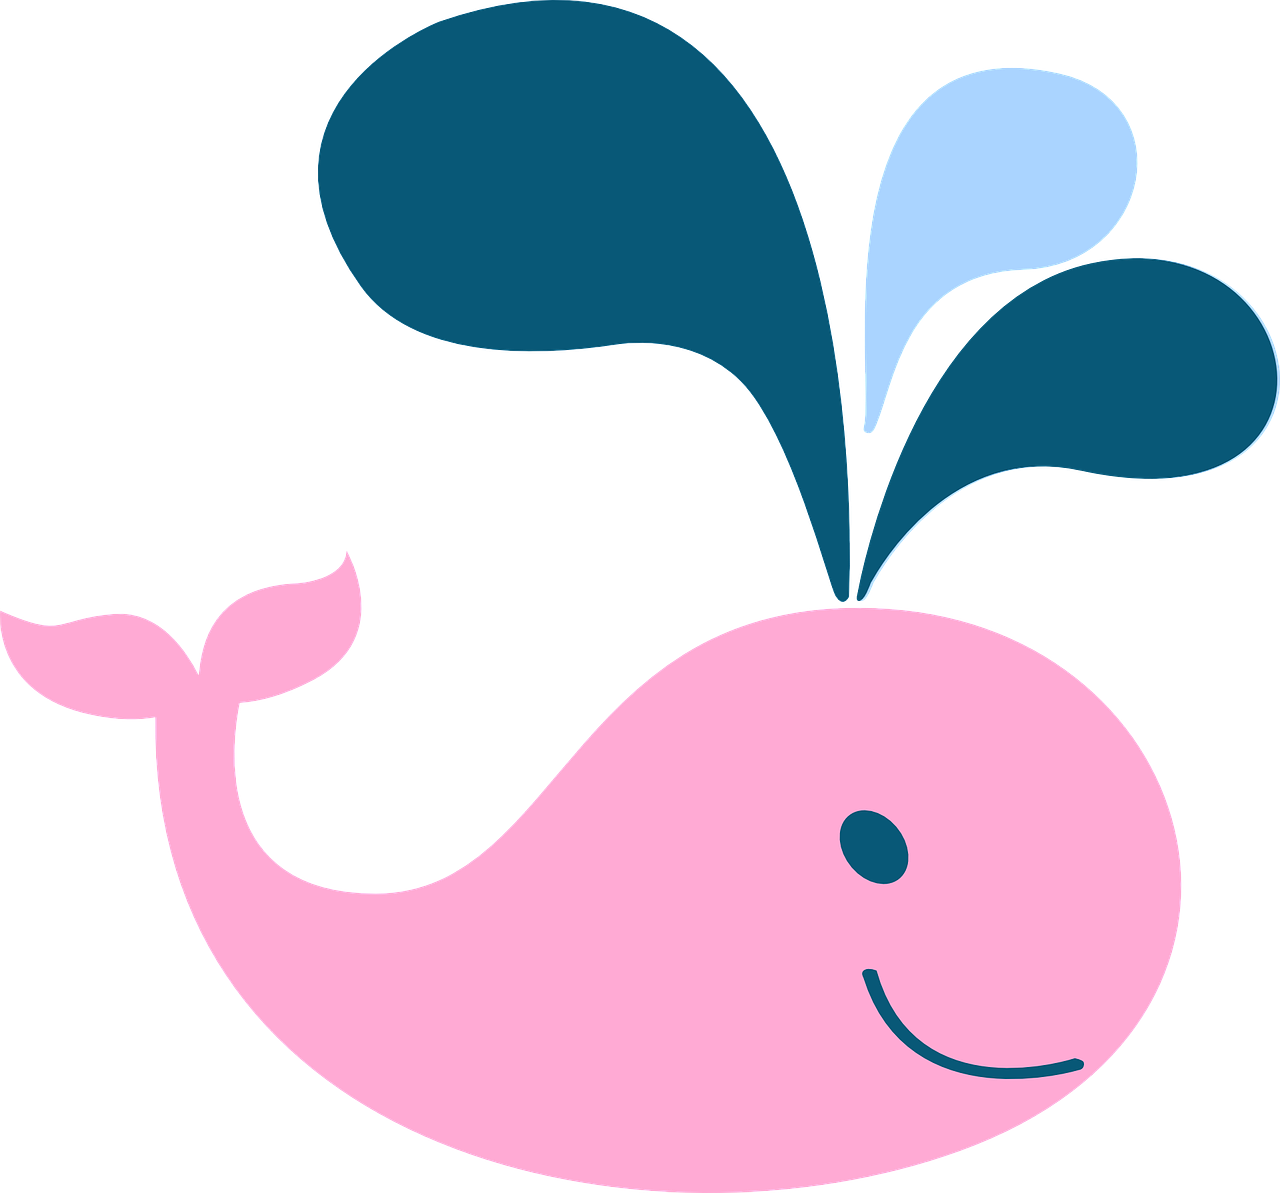 Weight clipart pink. Free image on pixabay